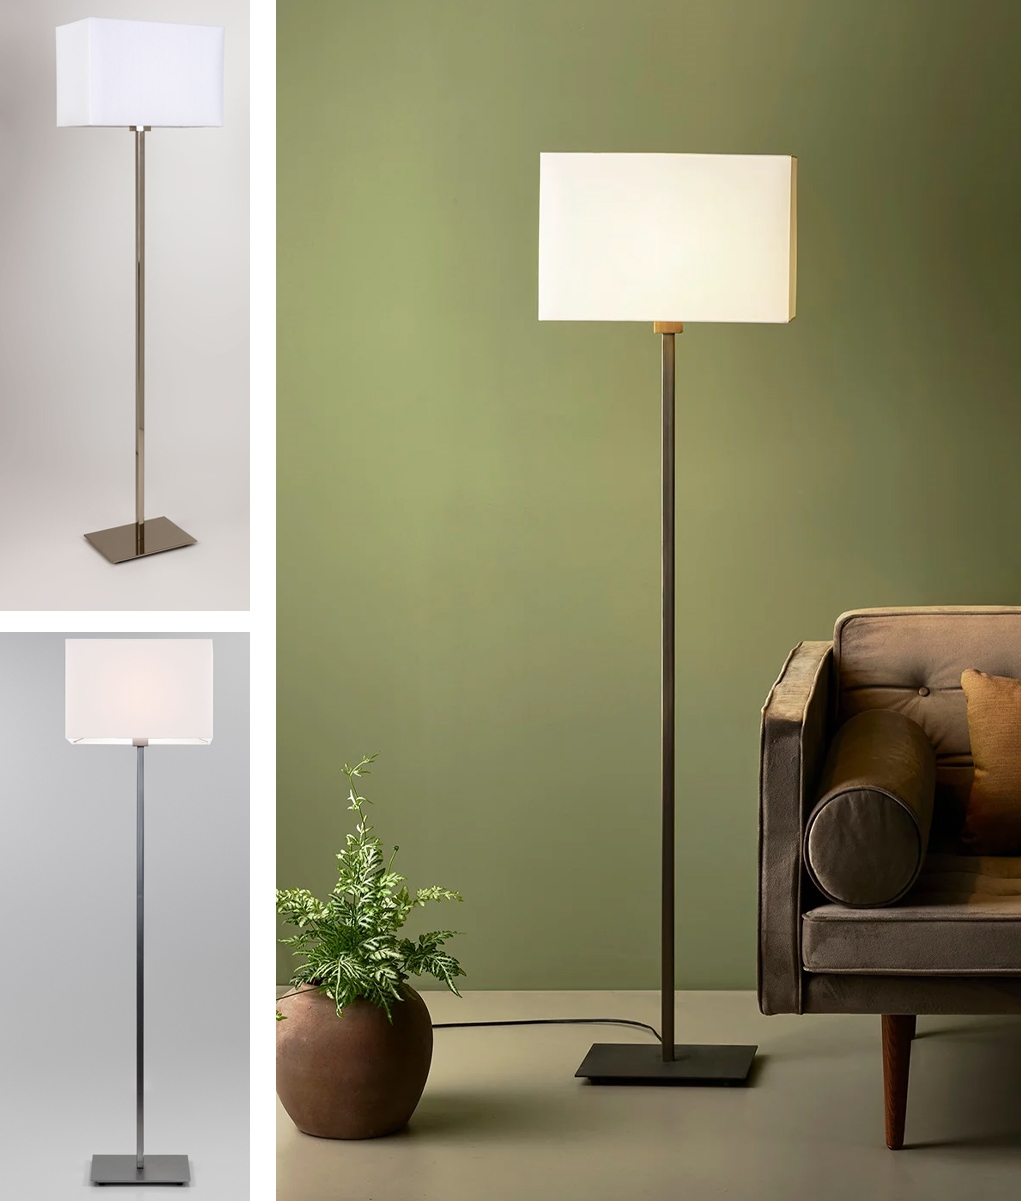 Floor Standing Lamp With A Square Stem, Floor Stand Lamp Shades